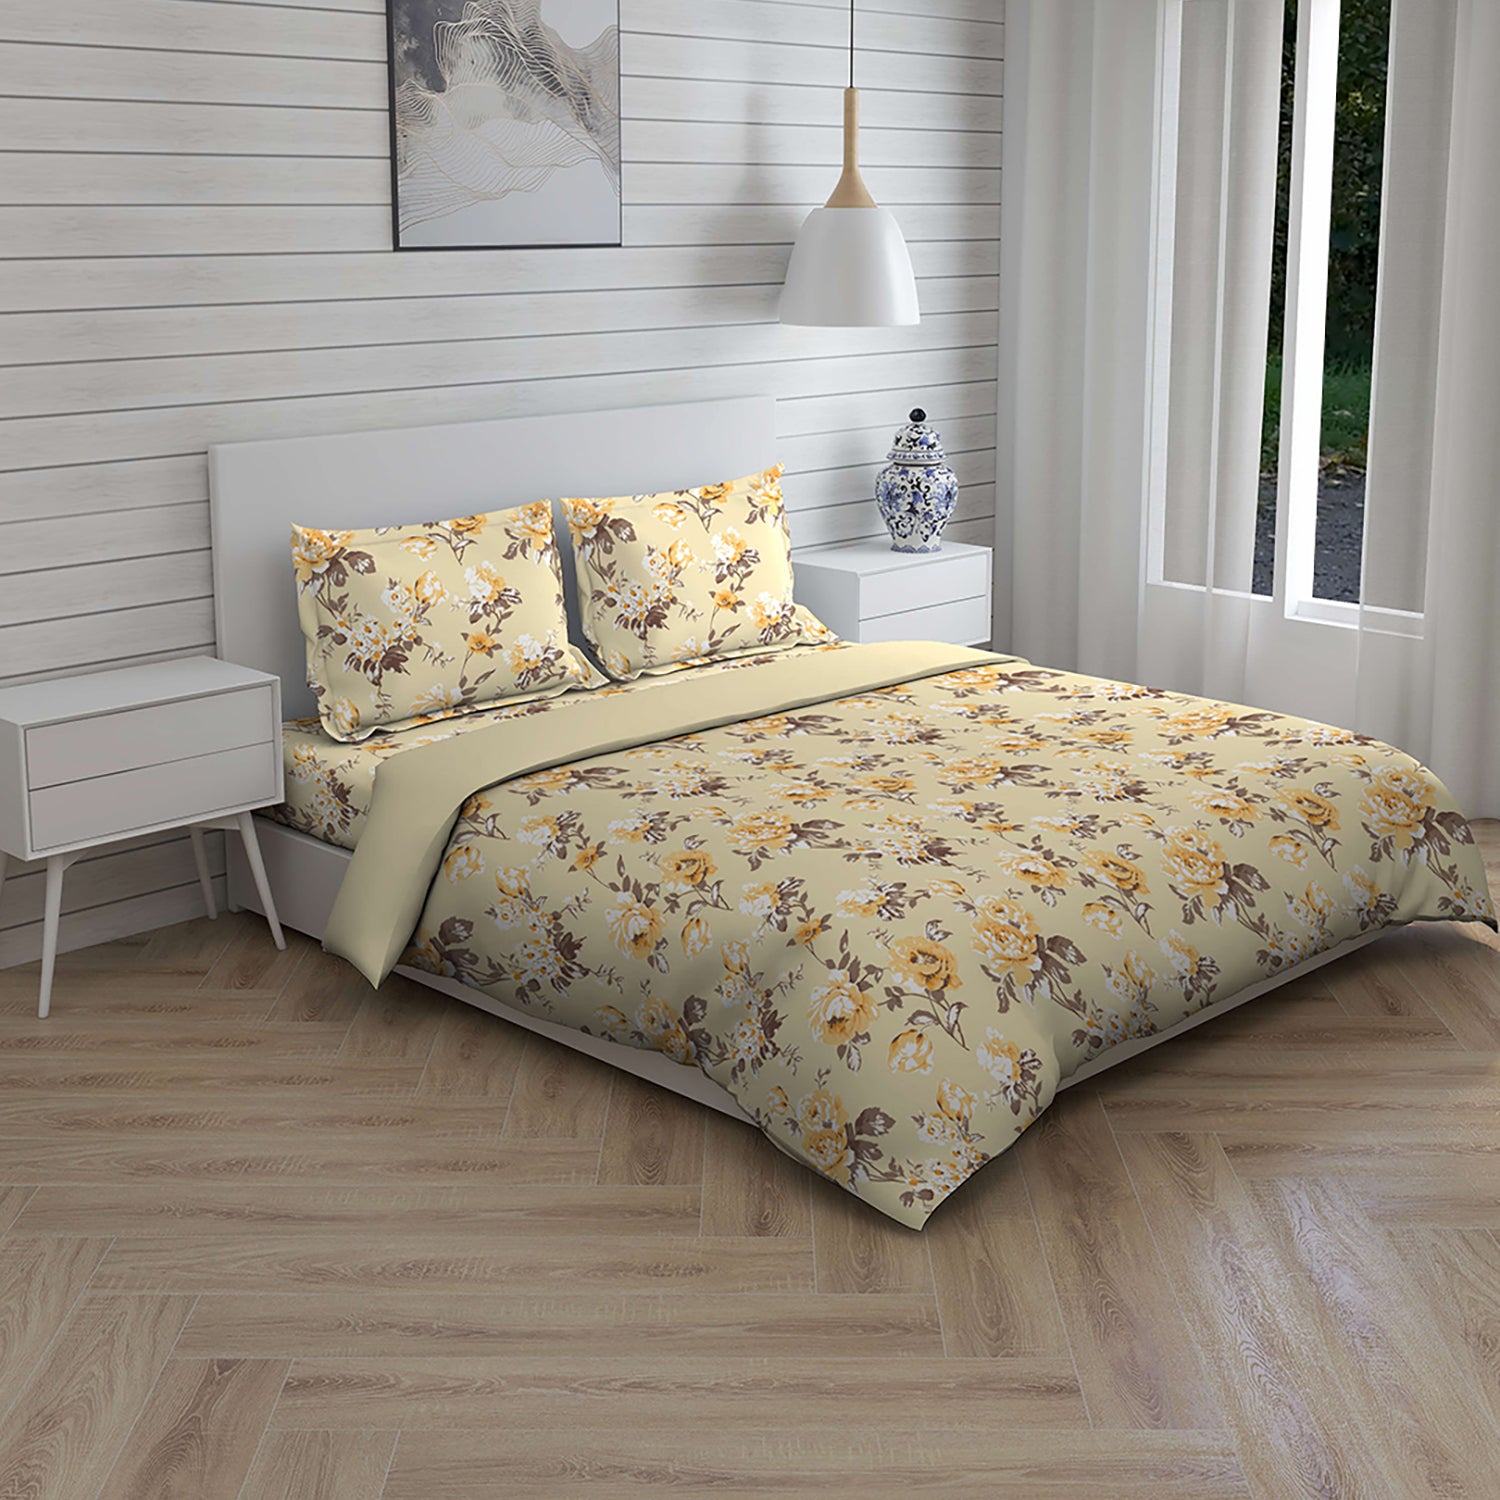 Boutique Living Double Printed Bed In A Bag